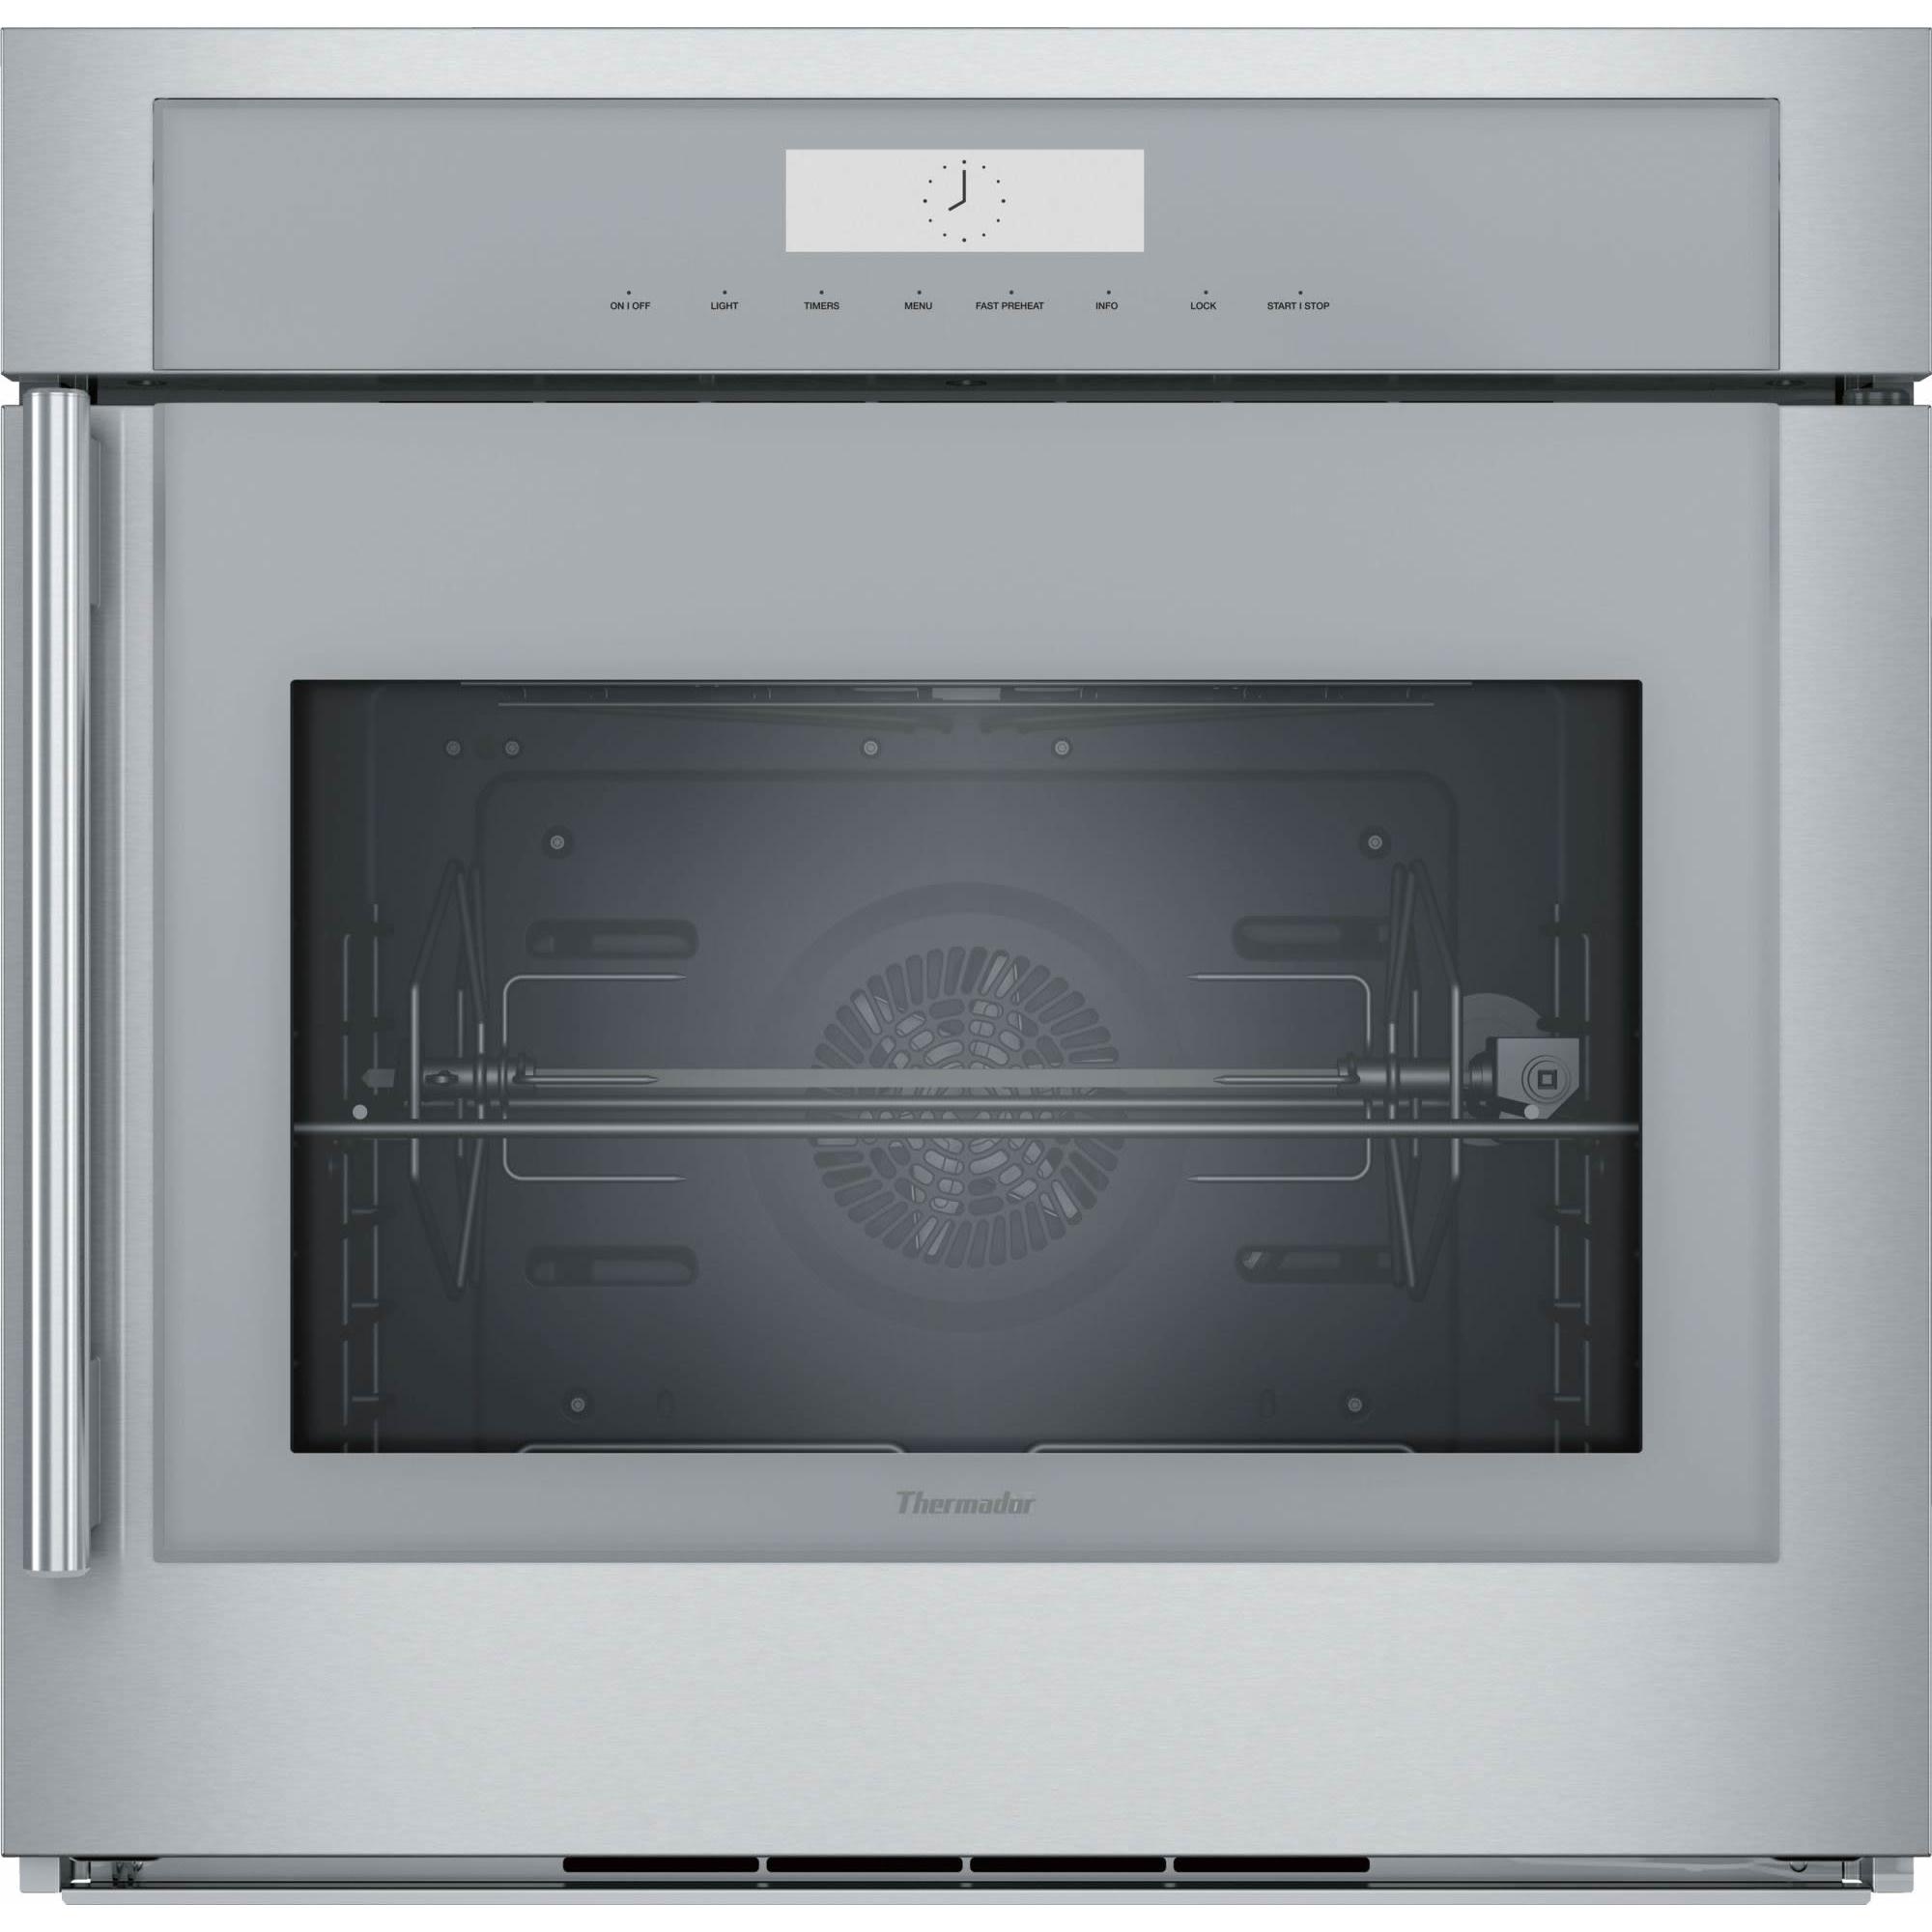 Thermador 30-inch, 4.5 cu.ft. Single Built-in Wall Oven with Home Connect MED301RWS